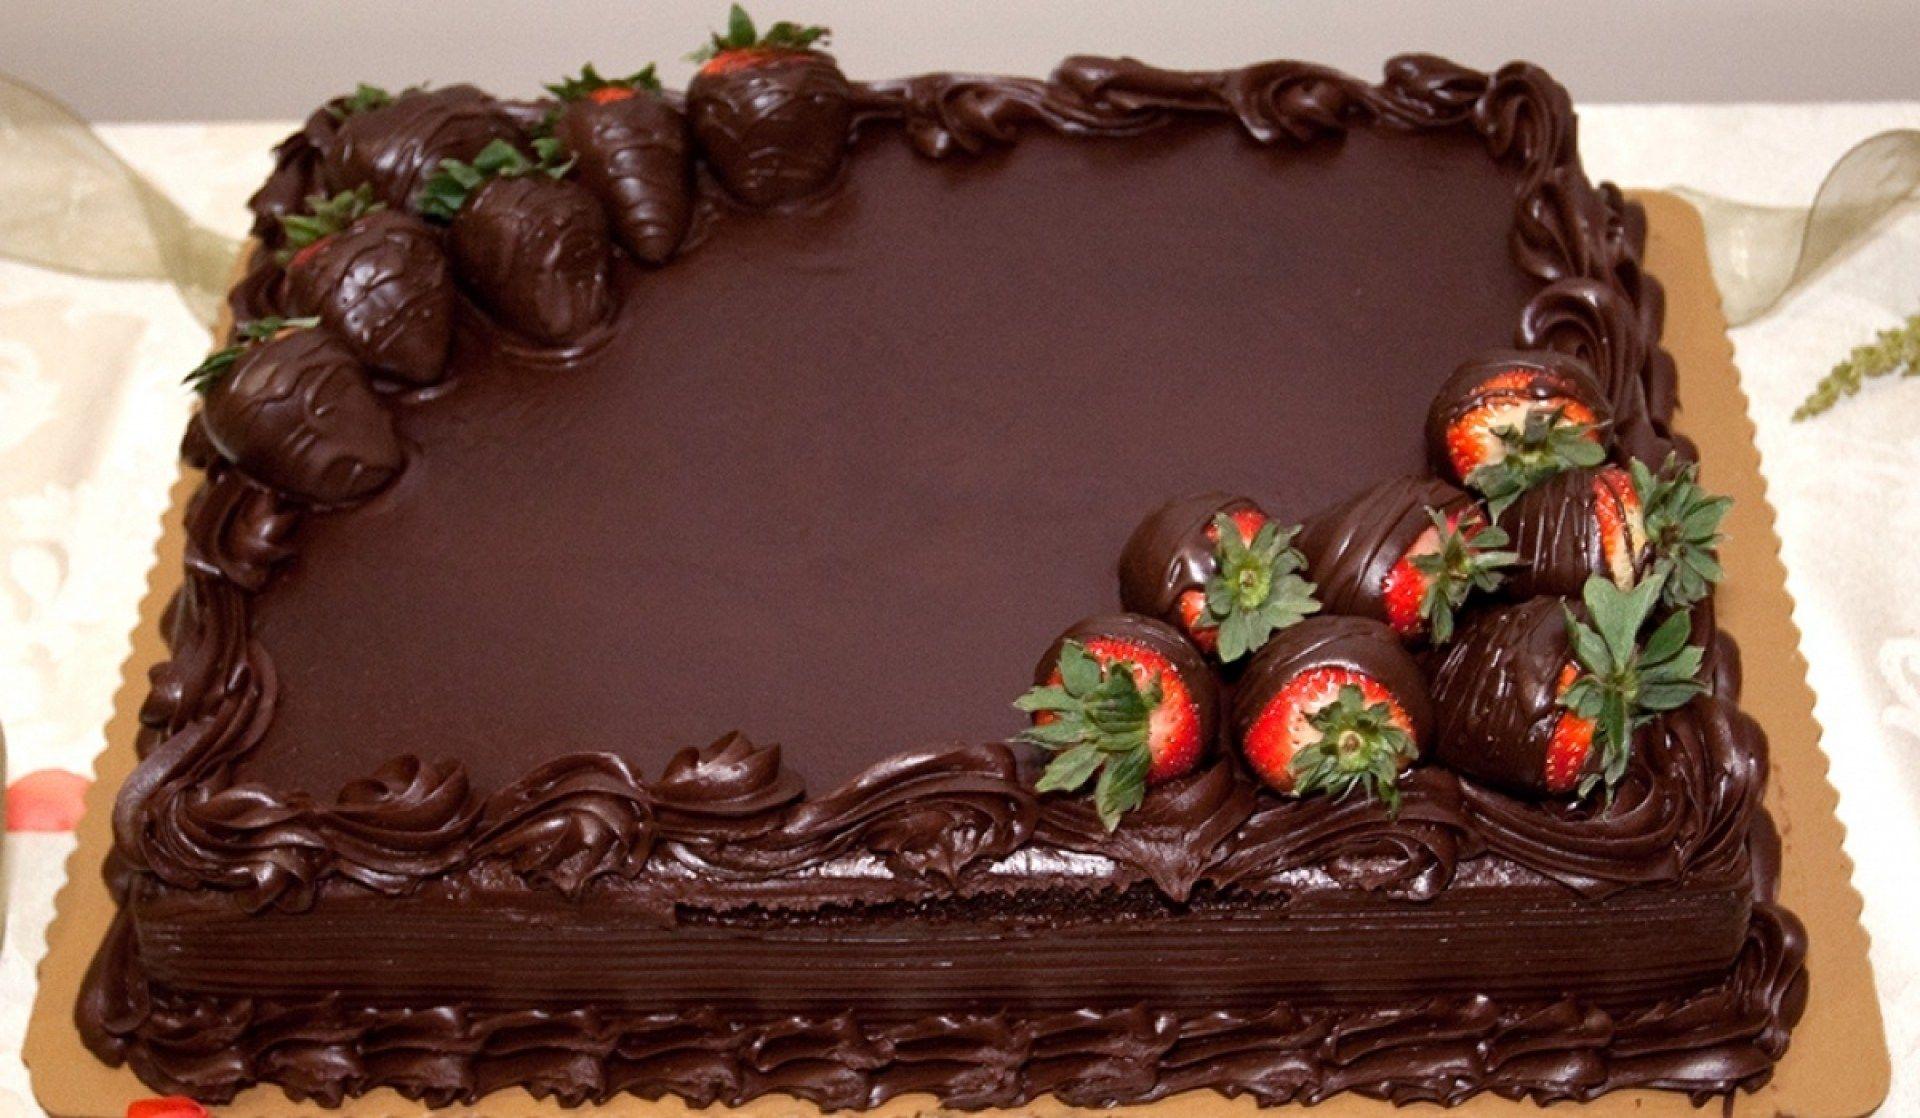 Front View Of Sweet Chocolate Cake Photo | JPG Free Download - Pikbest